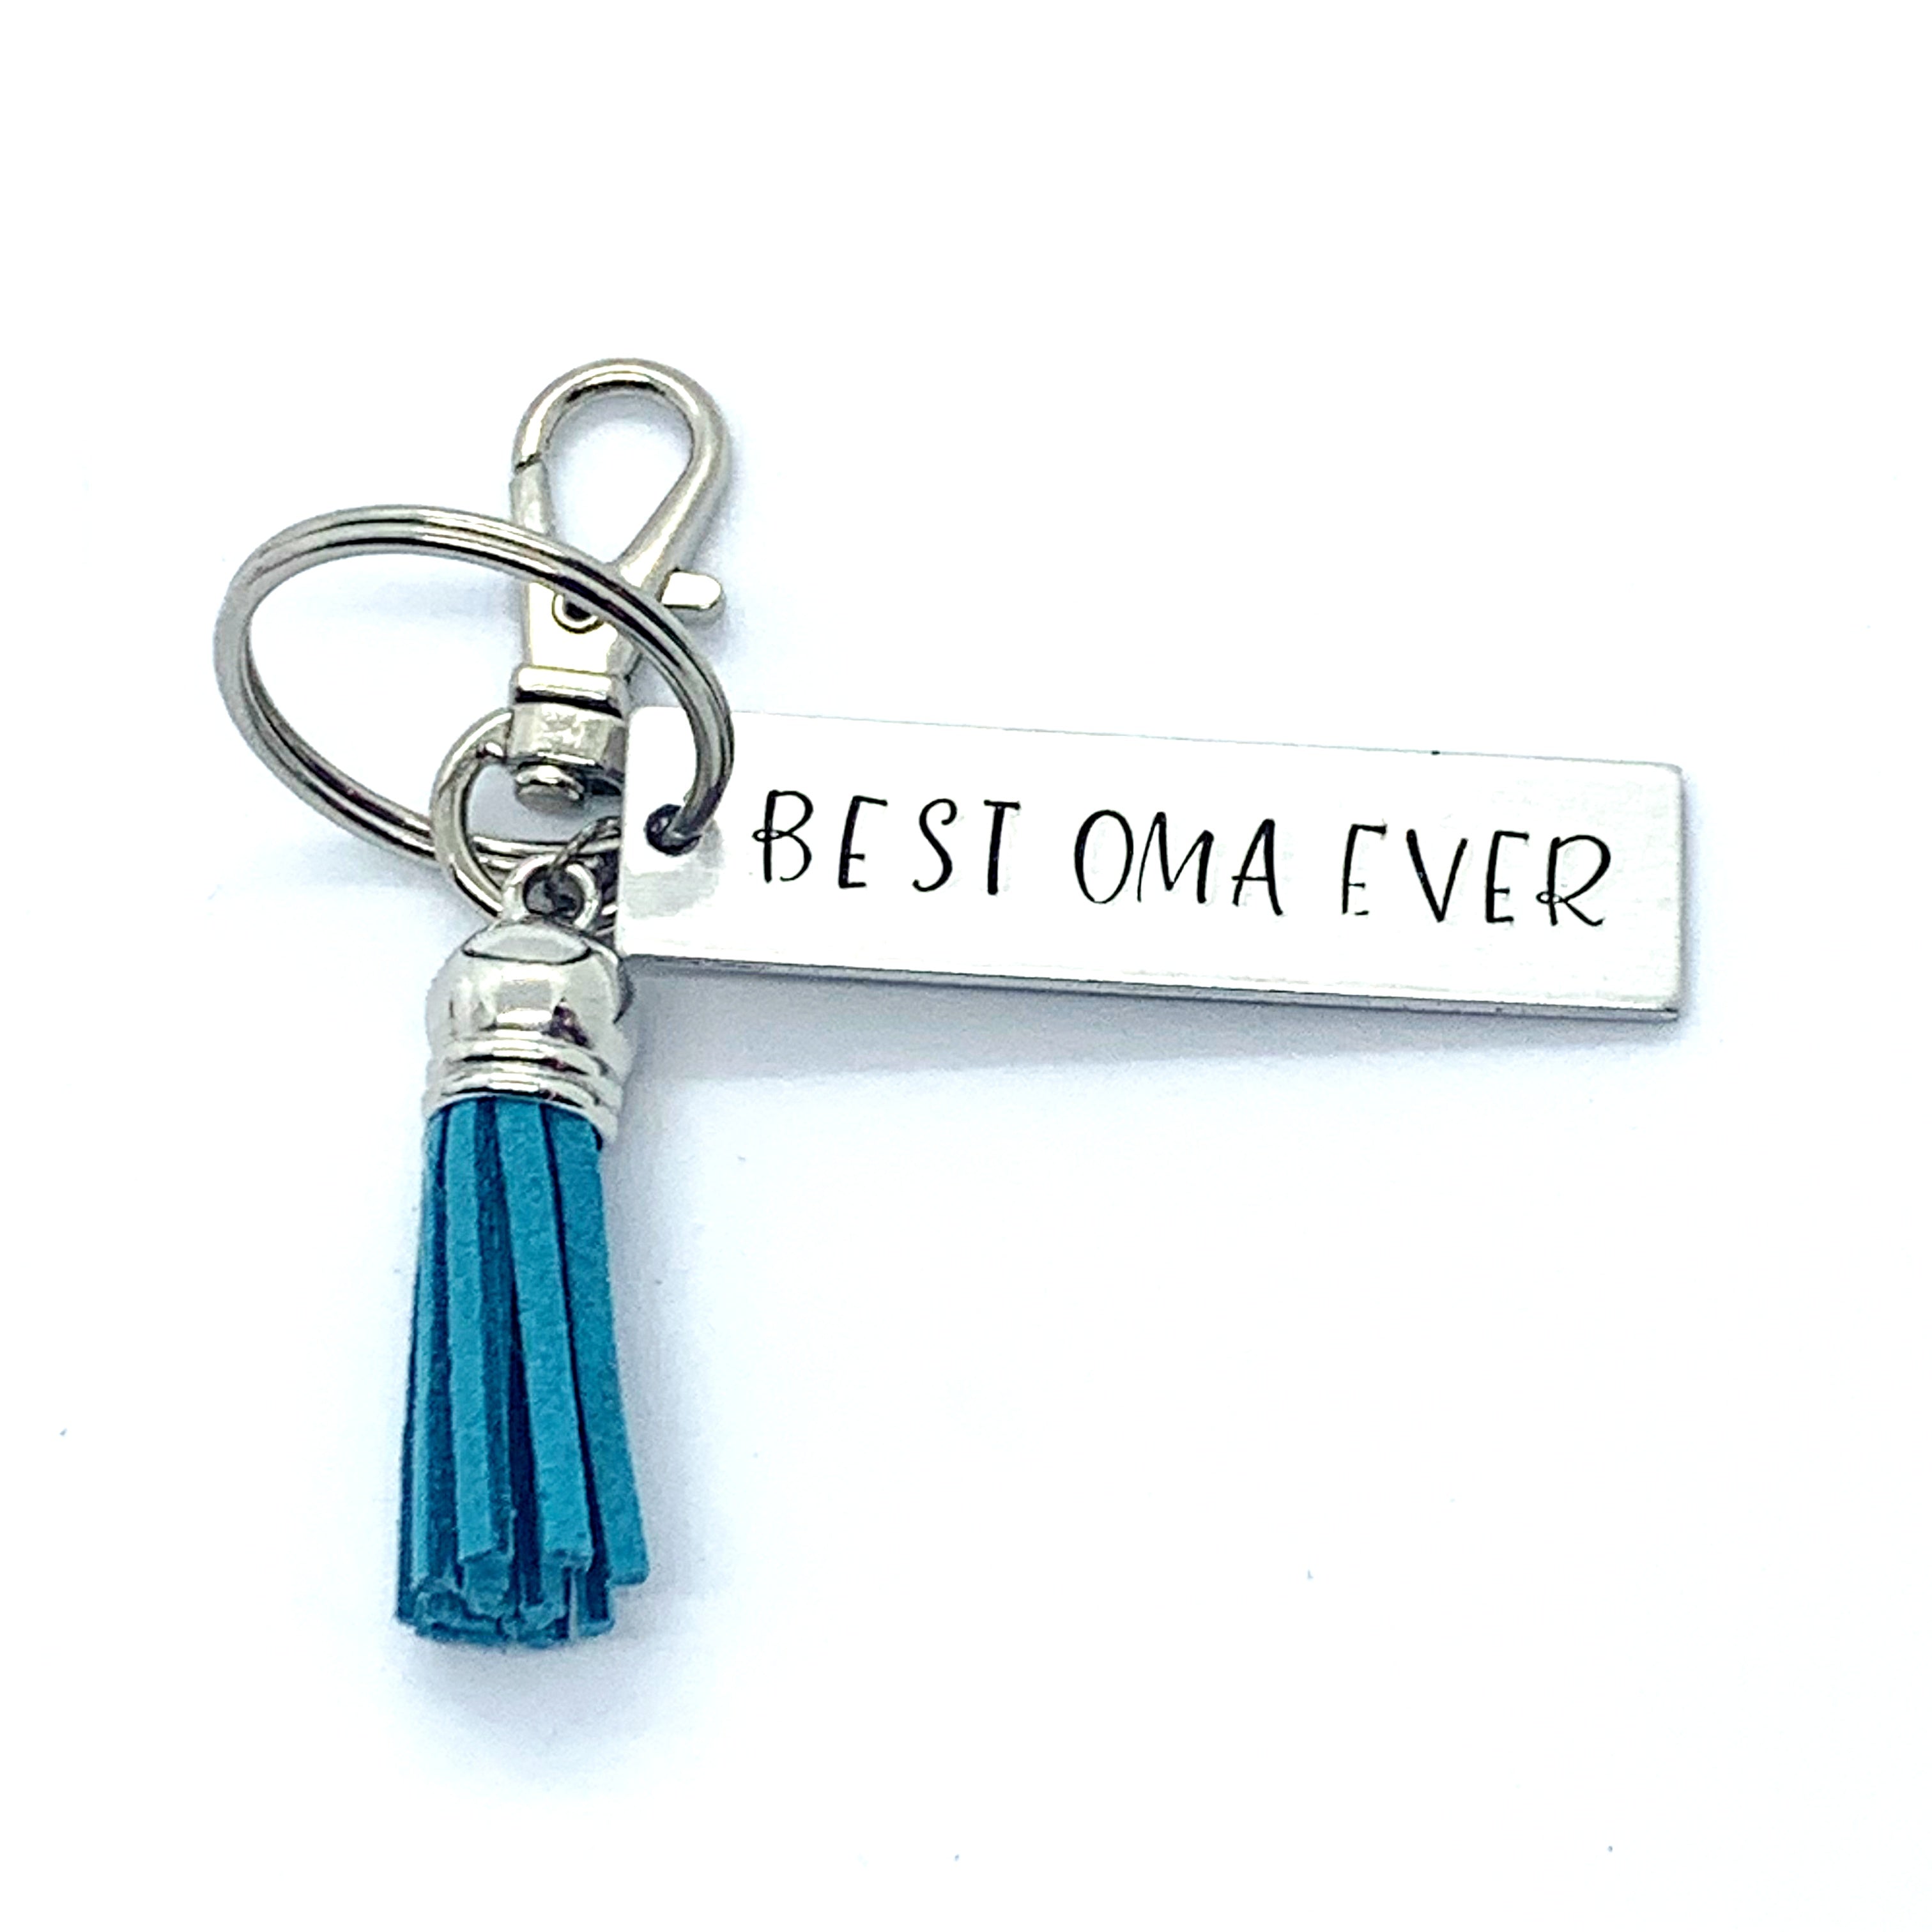 Key Chain - Small Rectangle - Best Oma Ever